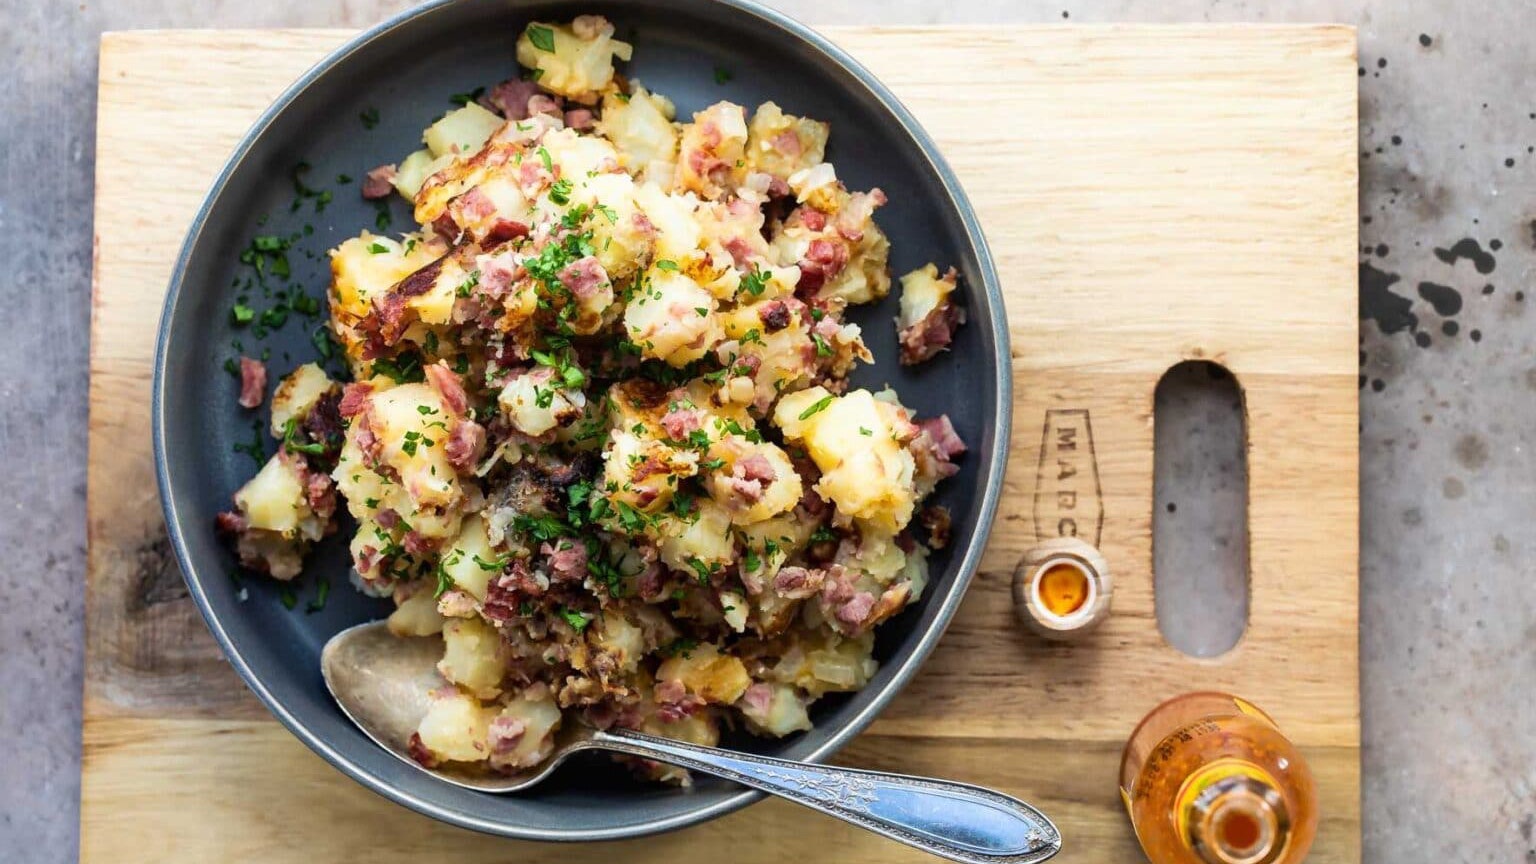 Hearty corned beef hash recipe for National Corned Beef Hash Day